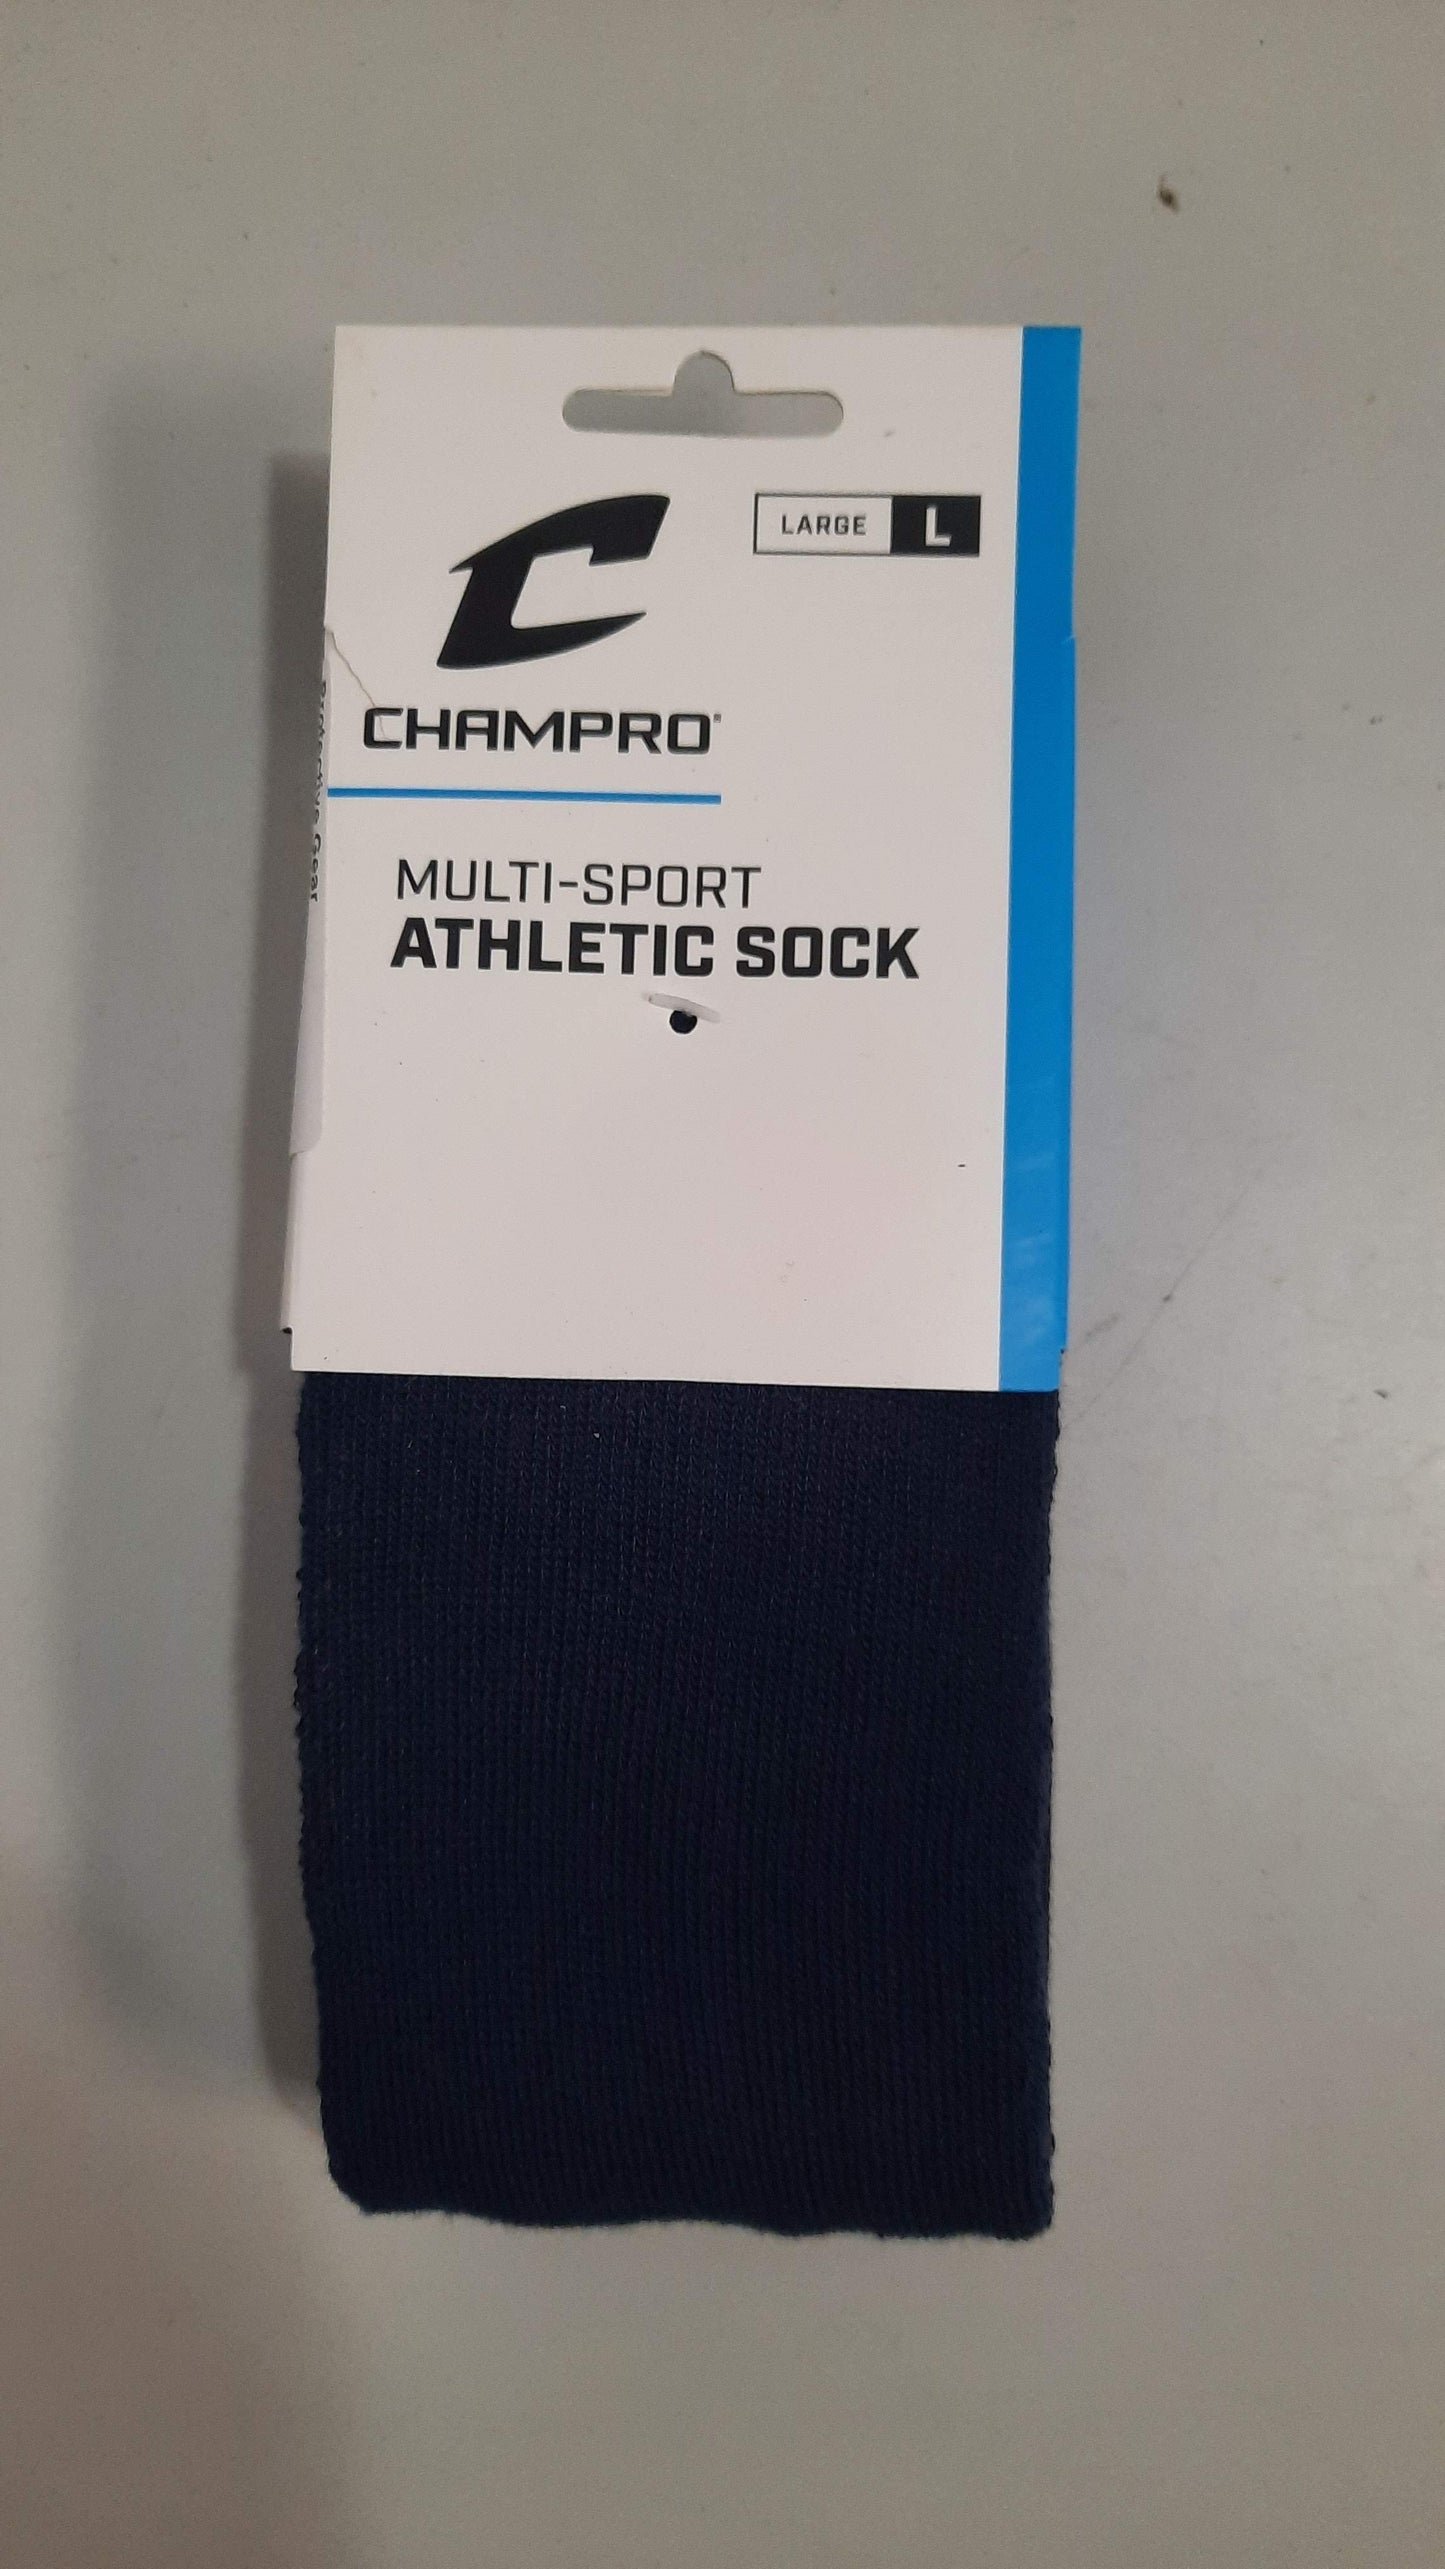 Champro Athletic Socks Size Large Color Navy Blue Multi-Sport Condition New